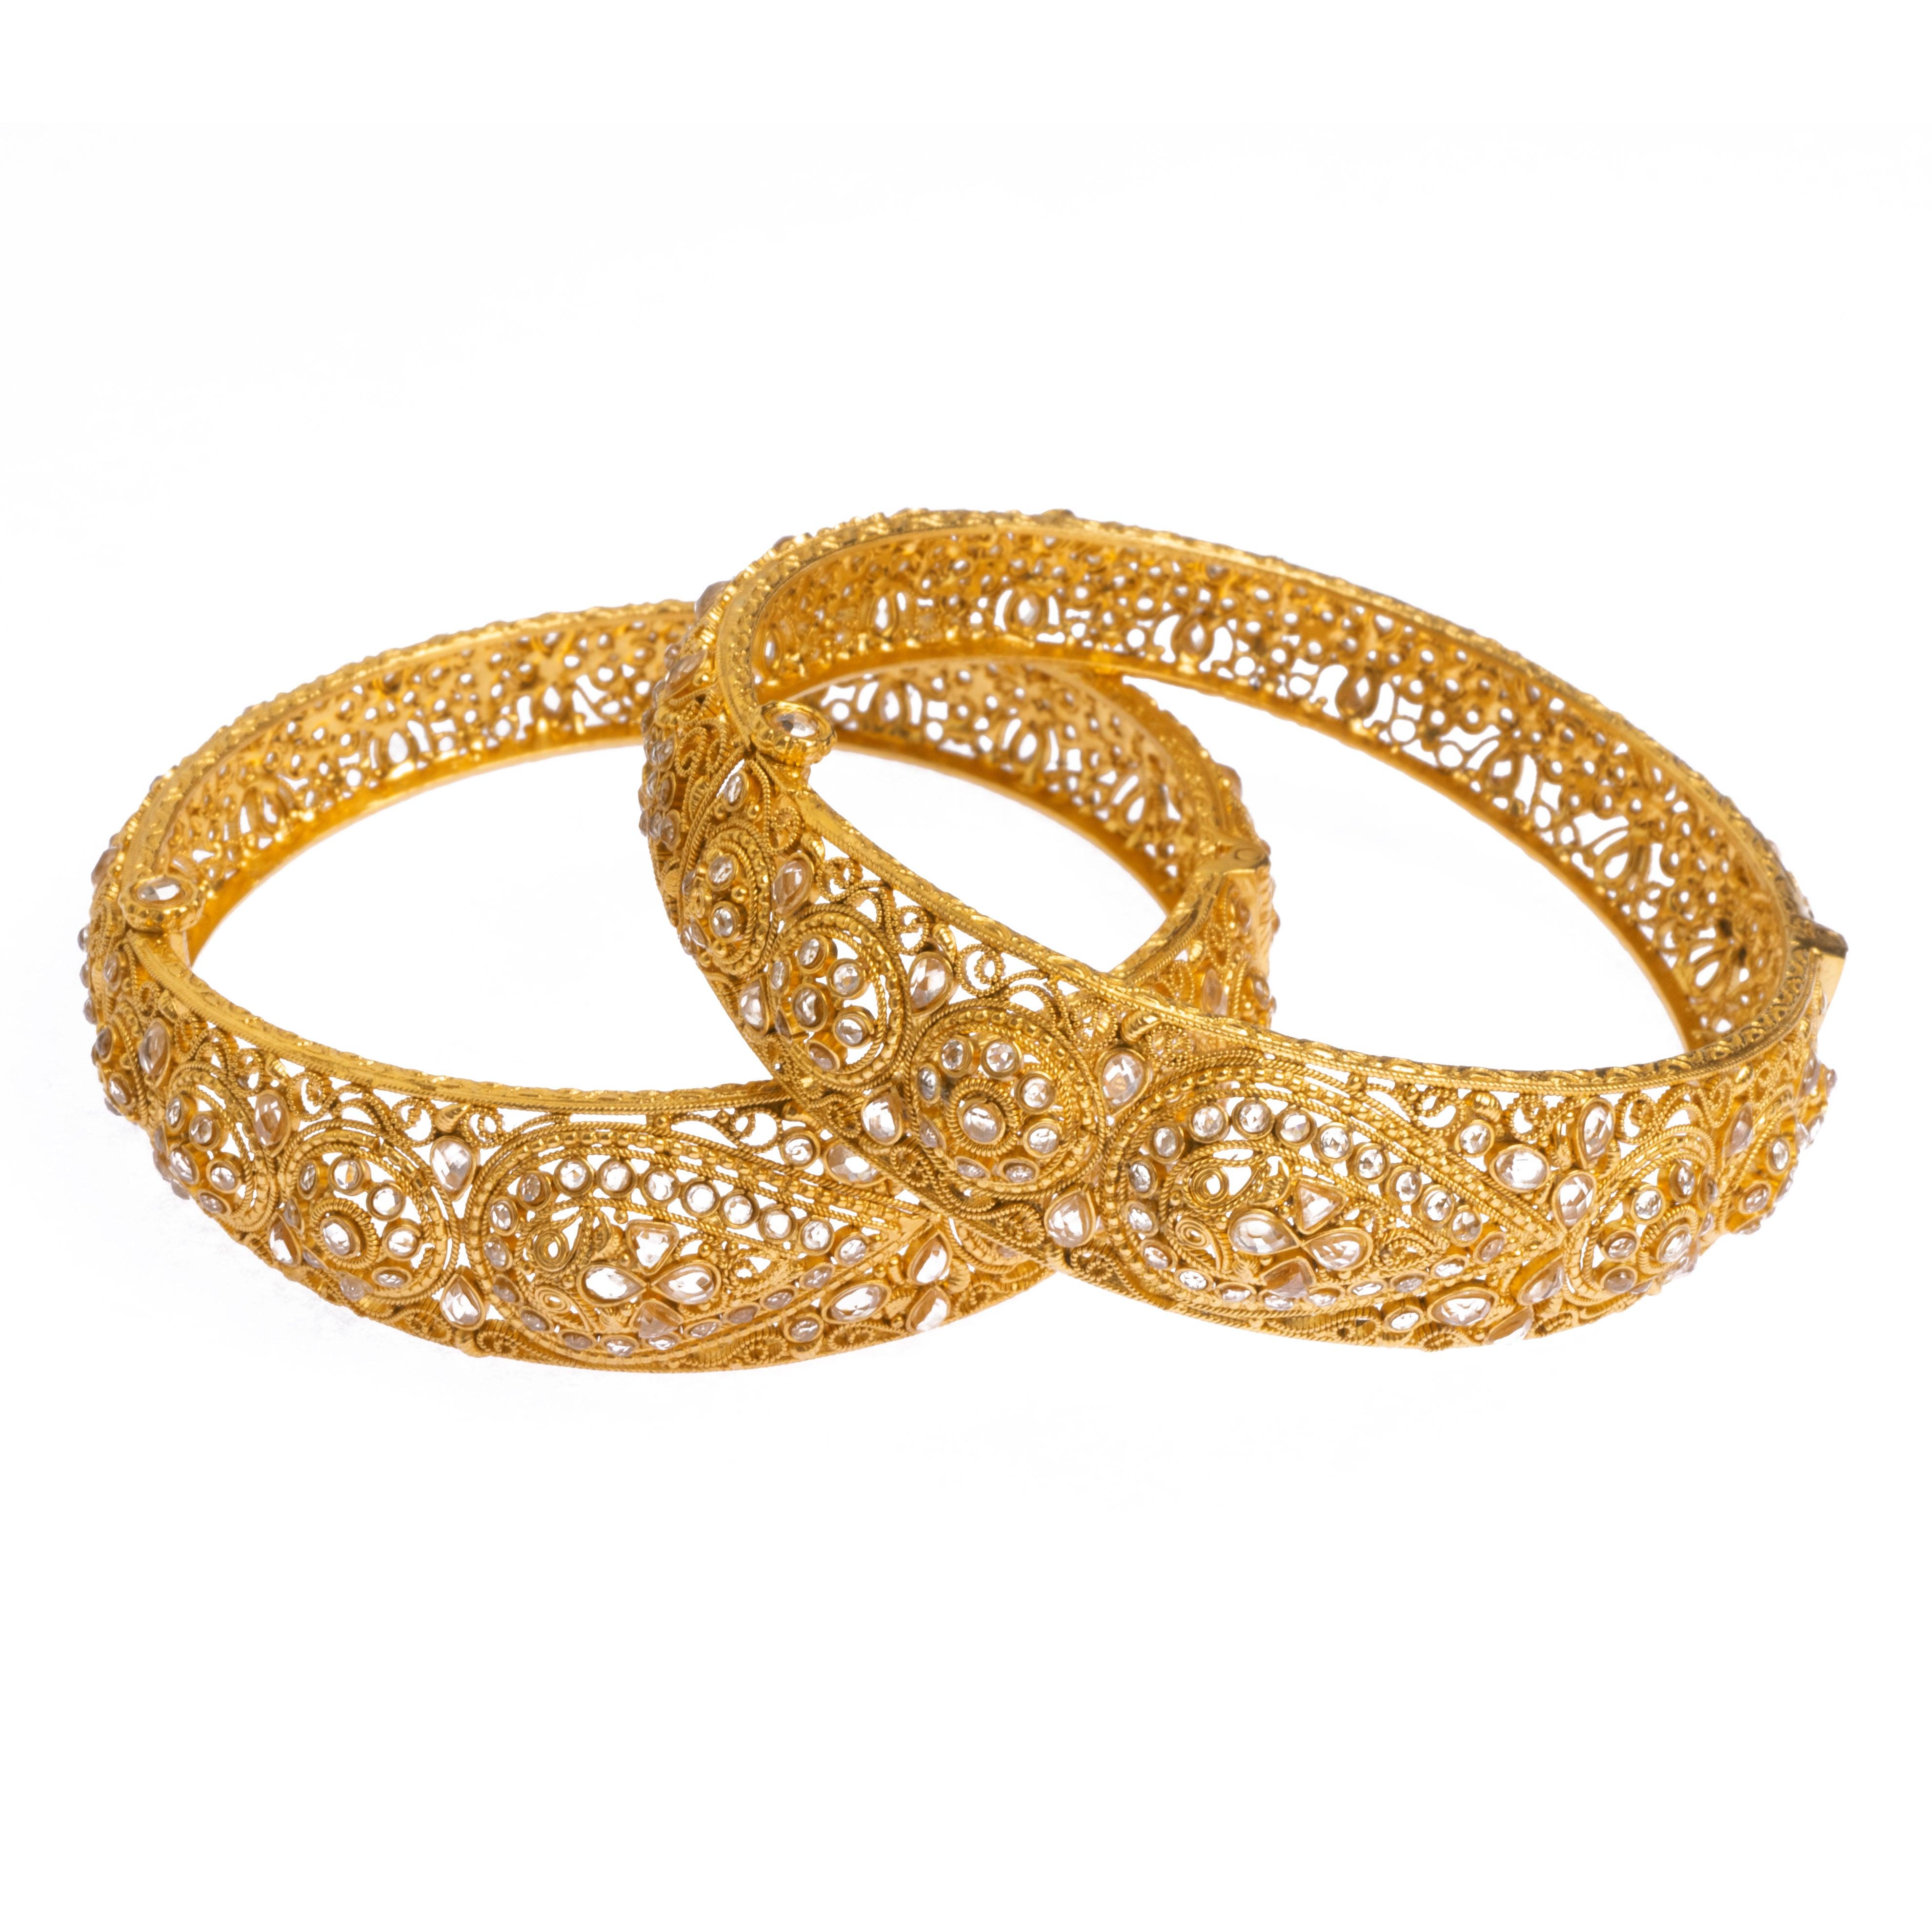 Pair of 22ct Gold Antiquated Look Openable Bangles with Polki Style Stones B-8288 - Minar Jewellers